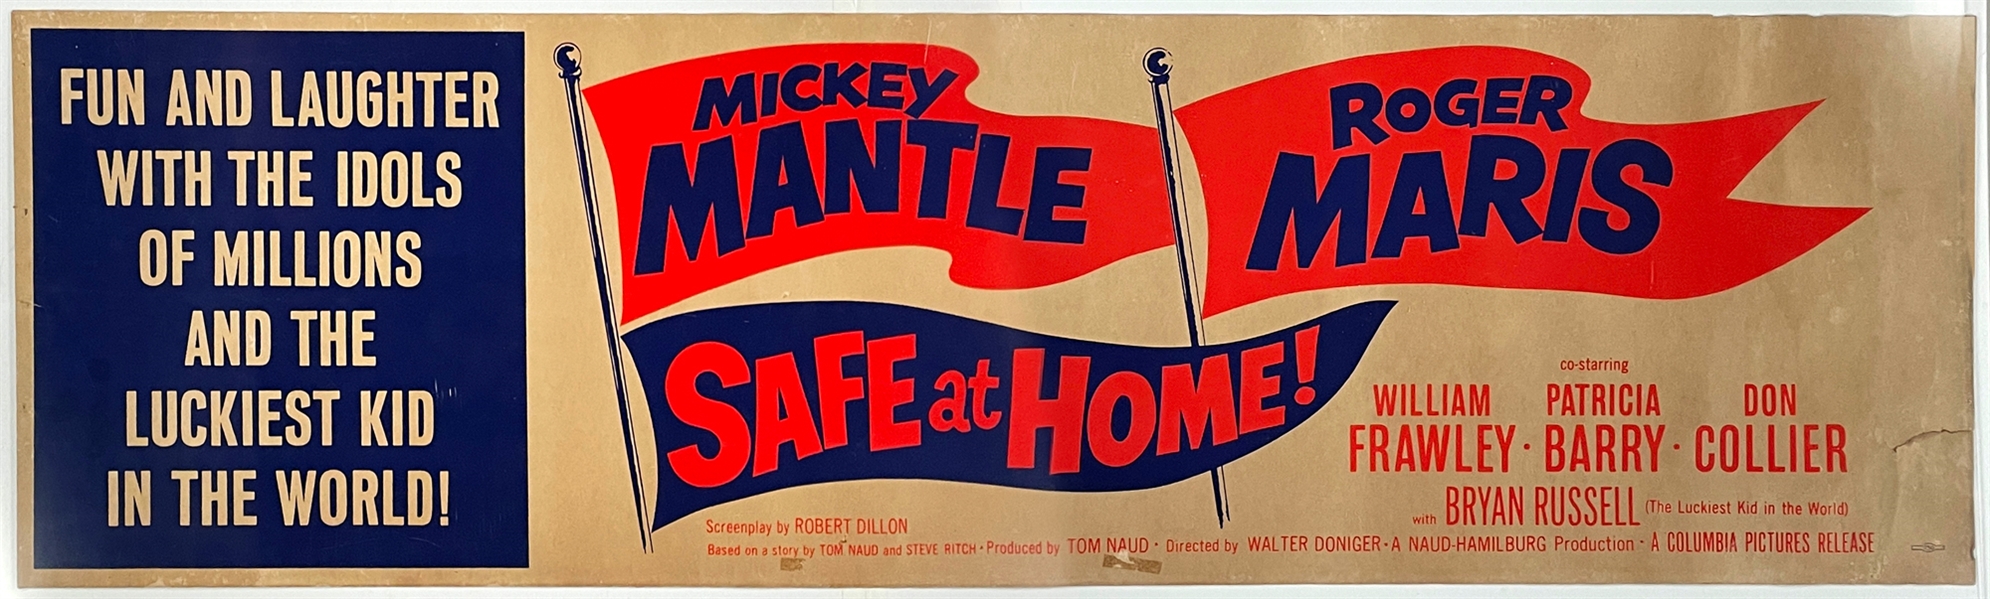 1962 <em>Safe at Home</em> Silk Screened Movie Theatre Paper Banner – 82 Inches in Length! Starring Mickey Mantle and Roger Maris